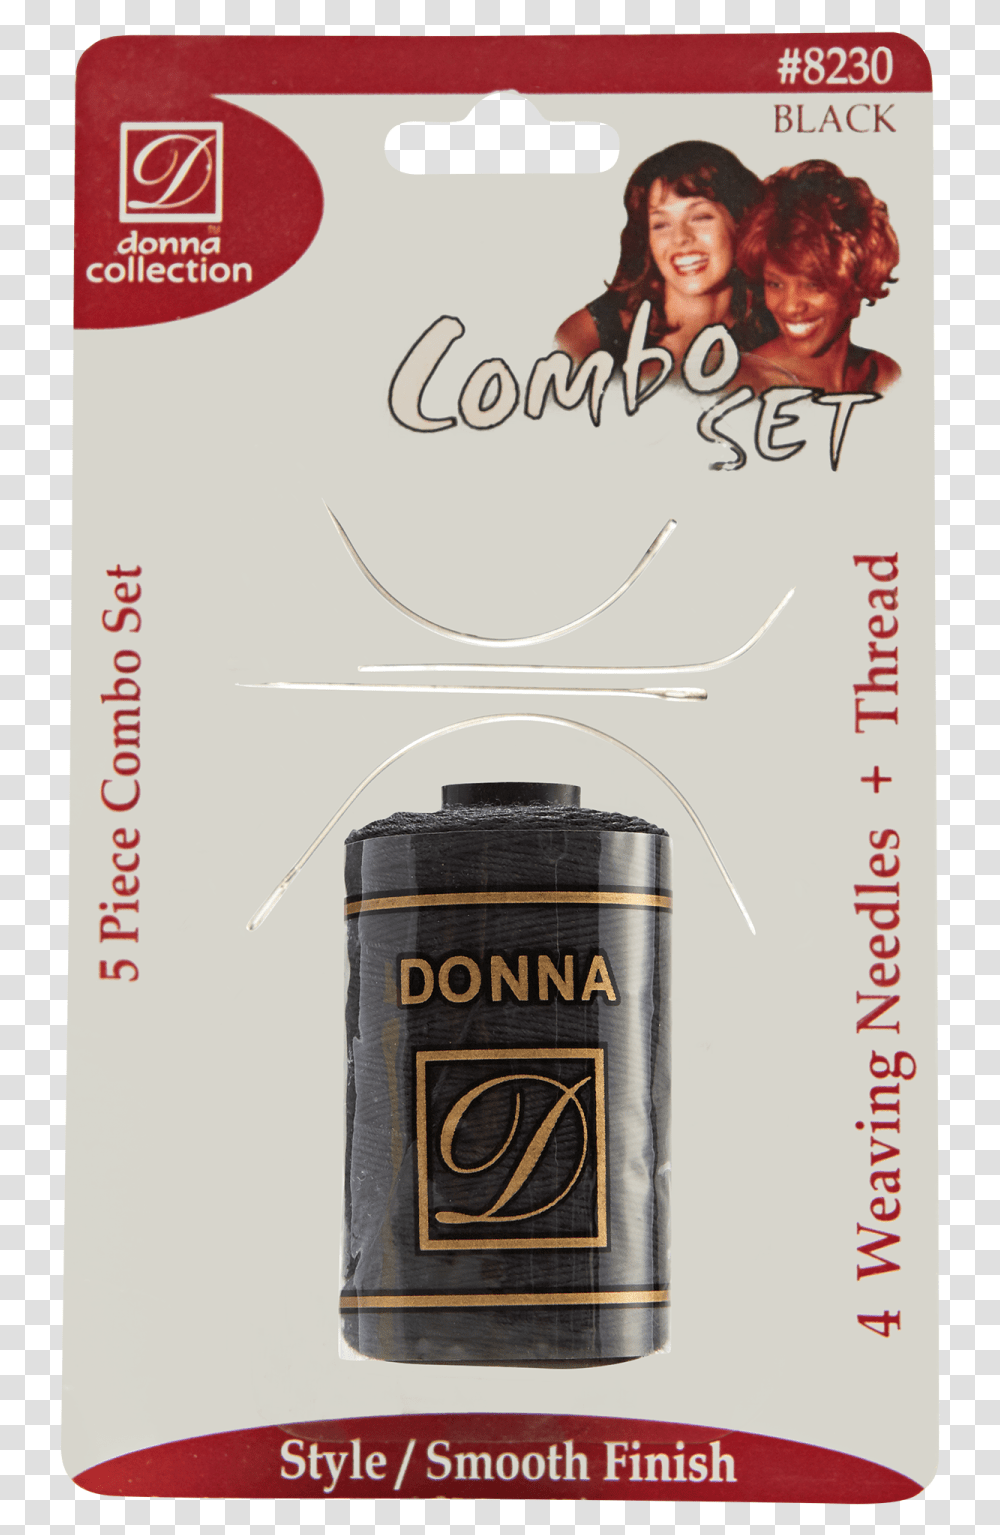 Donna Collection Black Weaving Thread Amp Needle, Bottle, Person, Cosmetics, Label Transparent Png